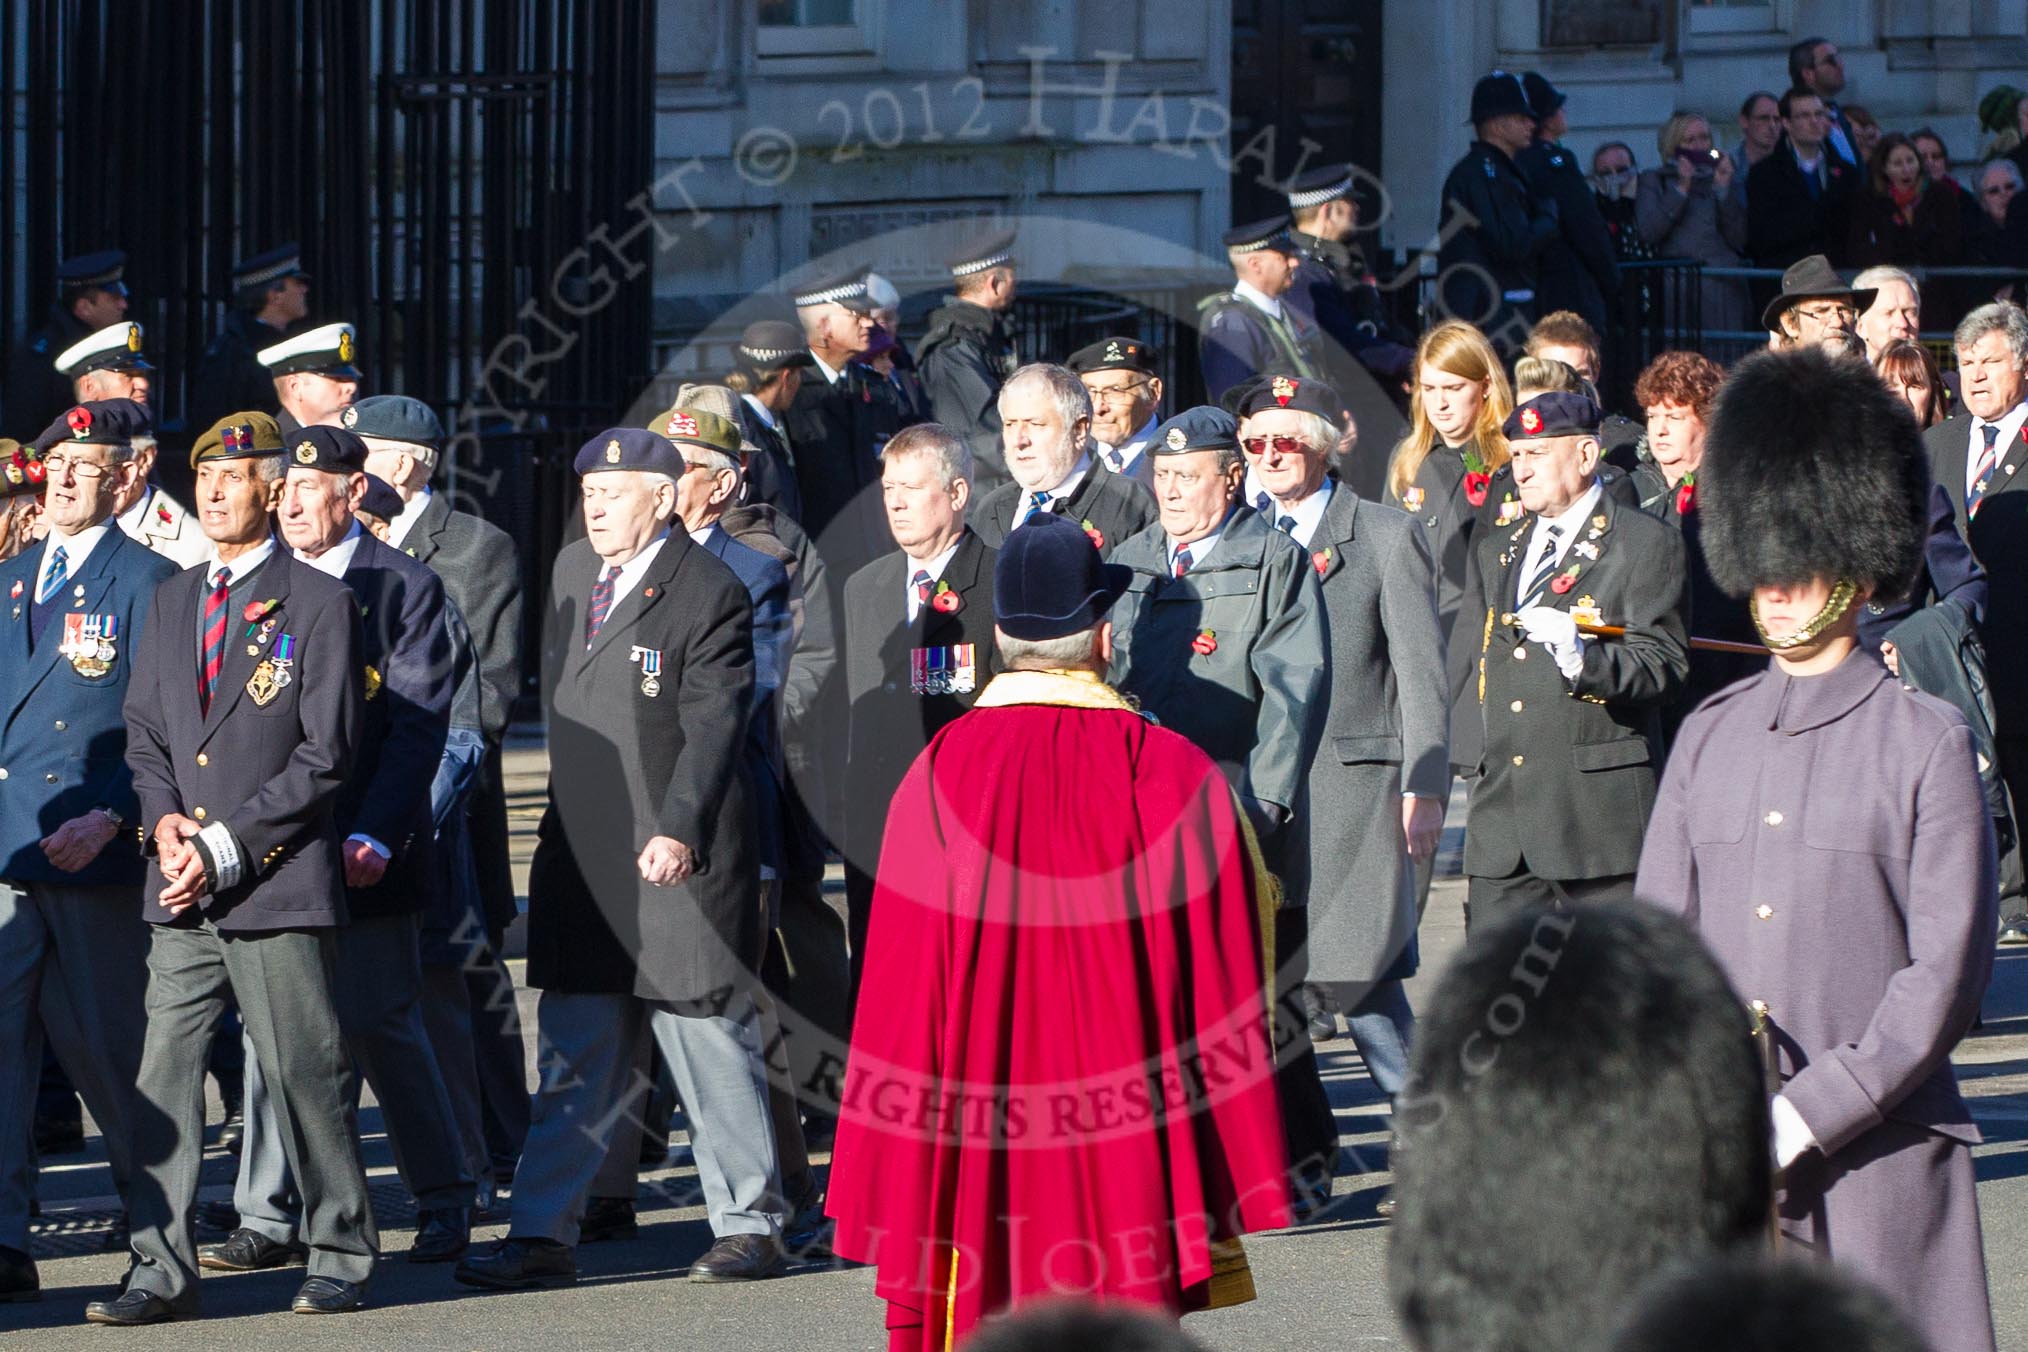 Remembrance Sunday 2012 Cenotaph March Past: Group F10 - National Service Veterans Alliance..
Whitehall, Cenotaph,
London SW1,

United Kingdom,
on 11 November 2012 at 11:46, image #447